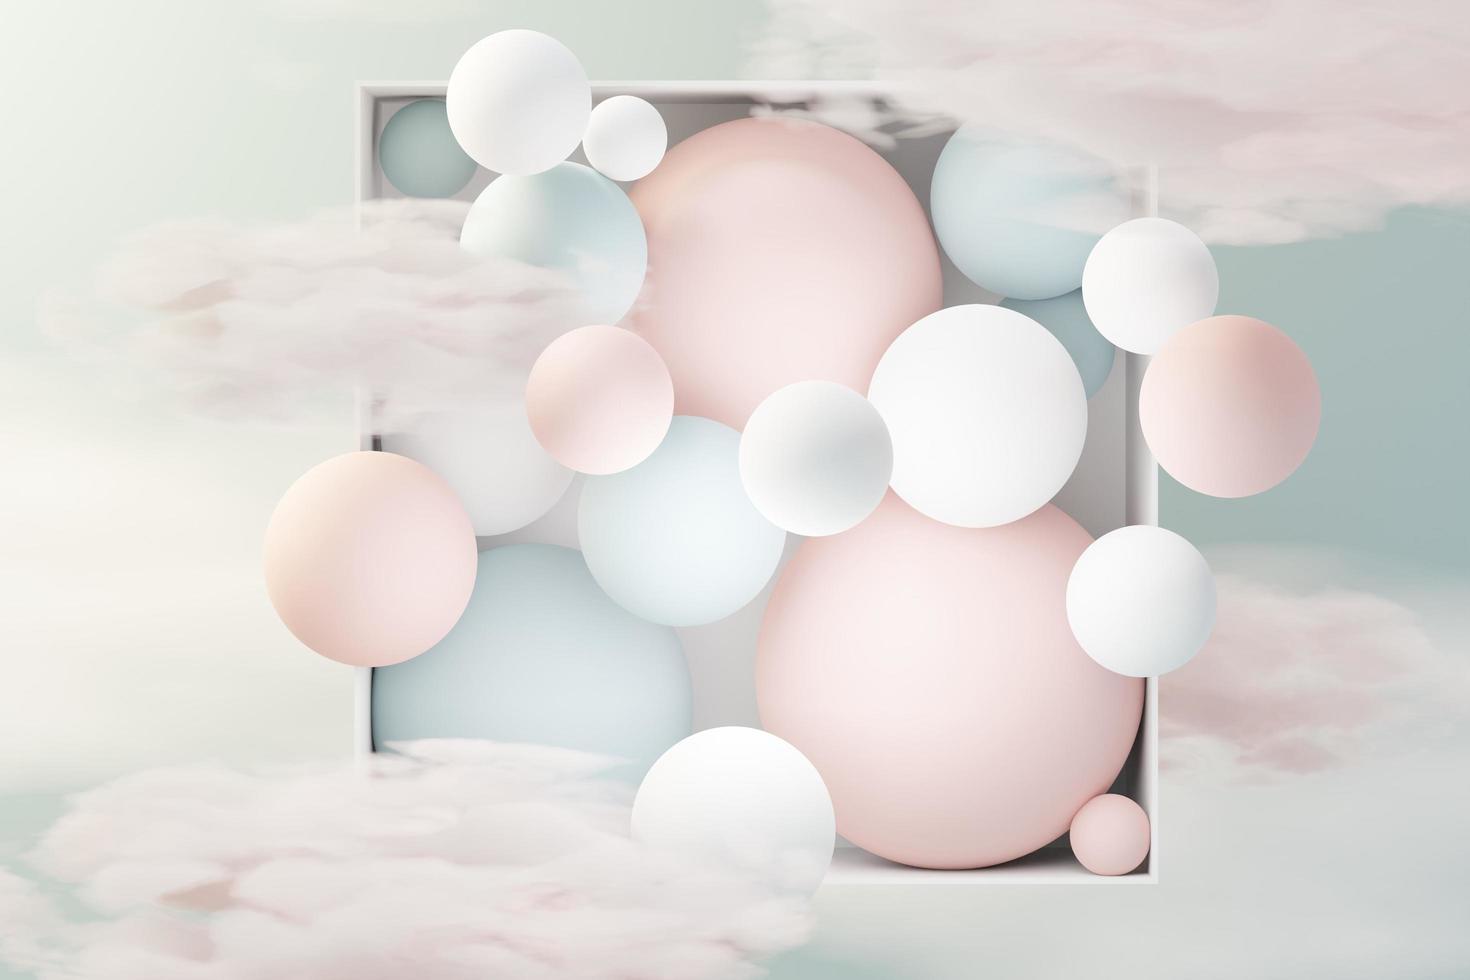 3d render of pastel ball, soaps bubbles, blobs that floating on the air with fluffy clouds and ocean. Romance land of dream scene. Natural abstract dreamy sky. photo